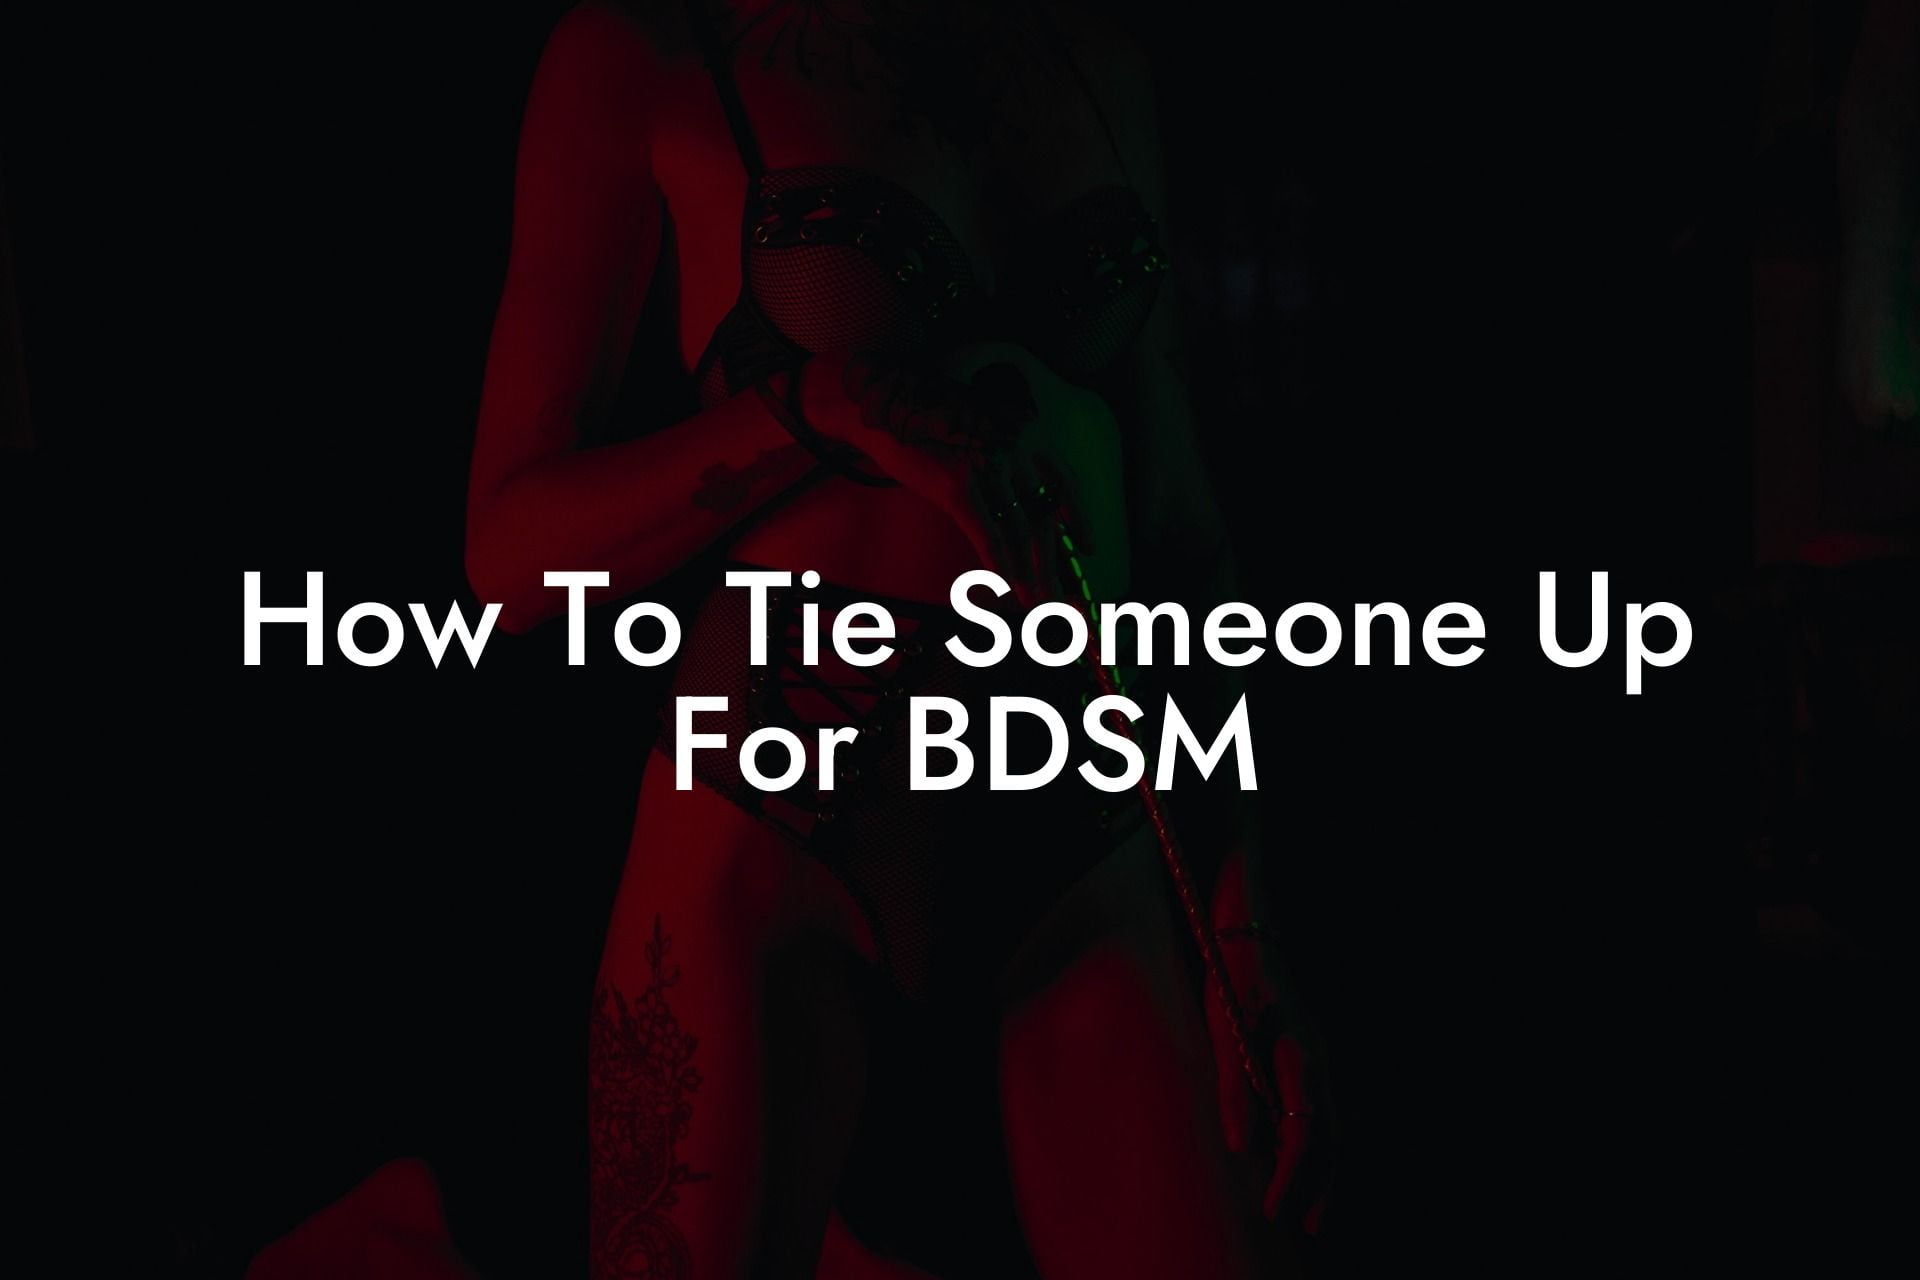 How To Tie Someone Up For BDSM